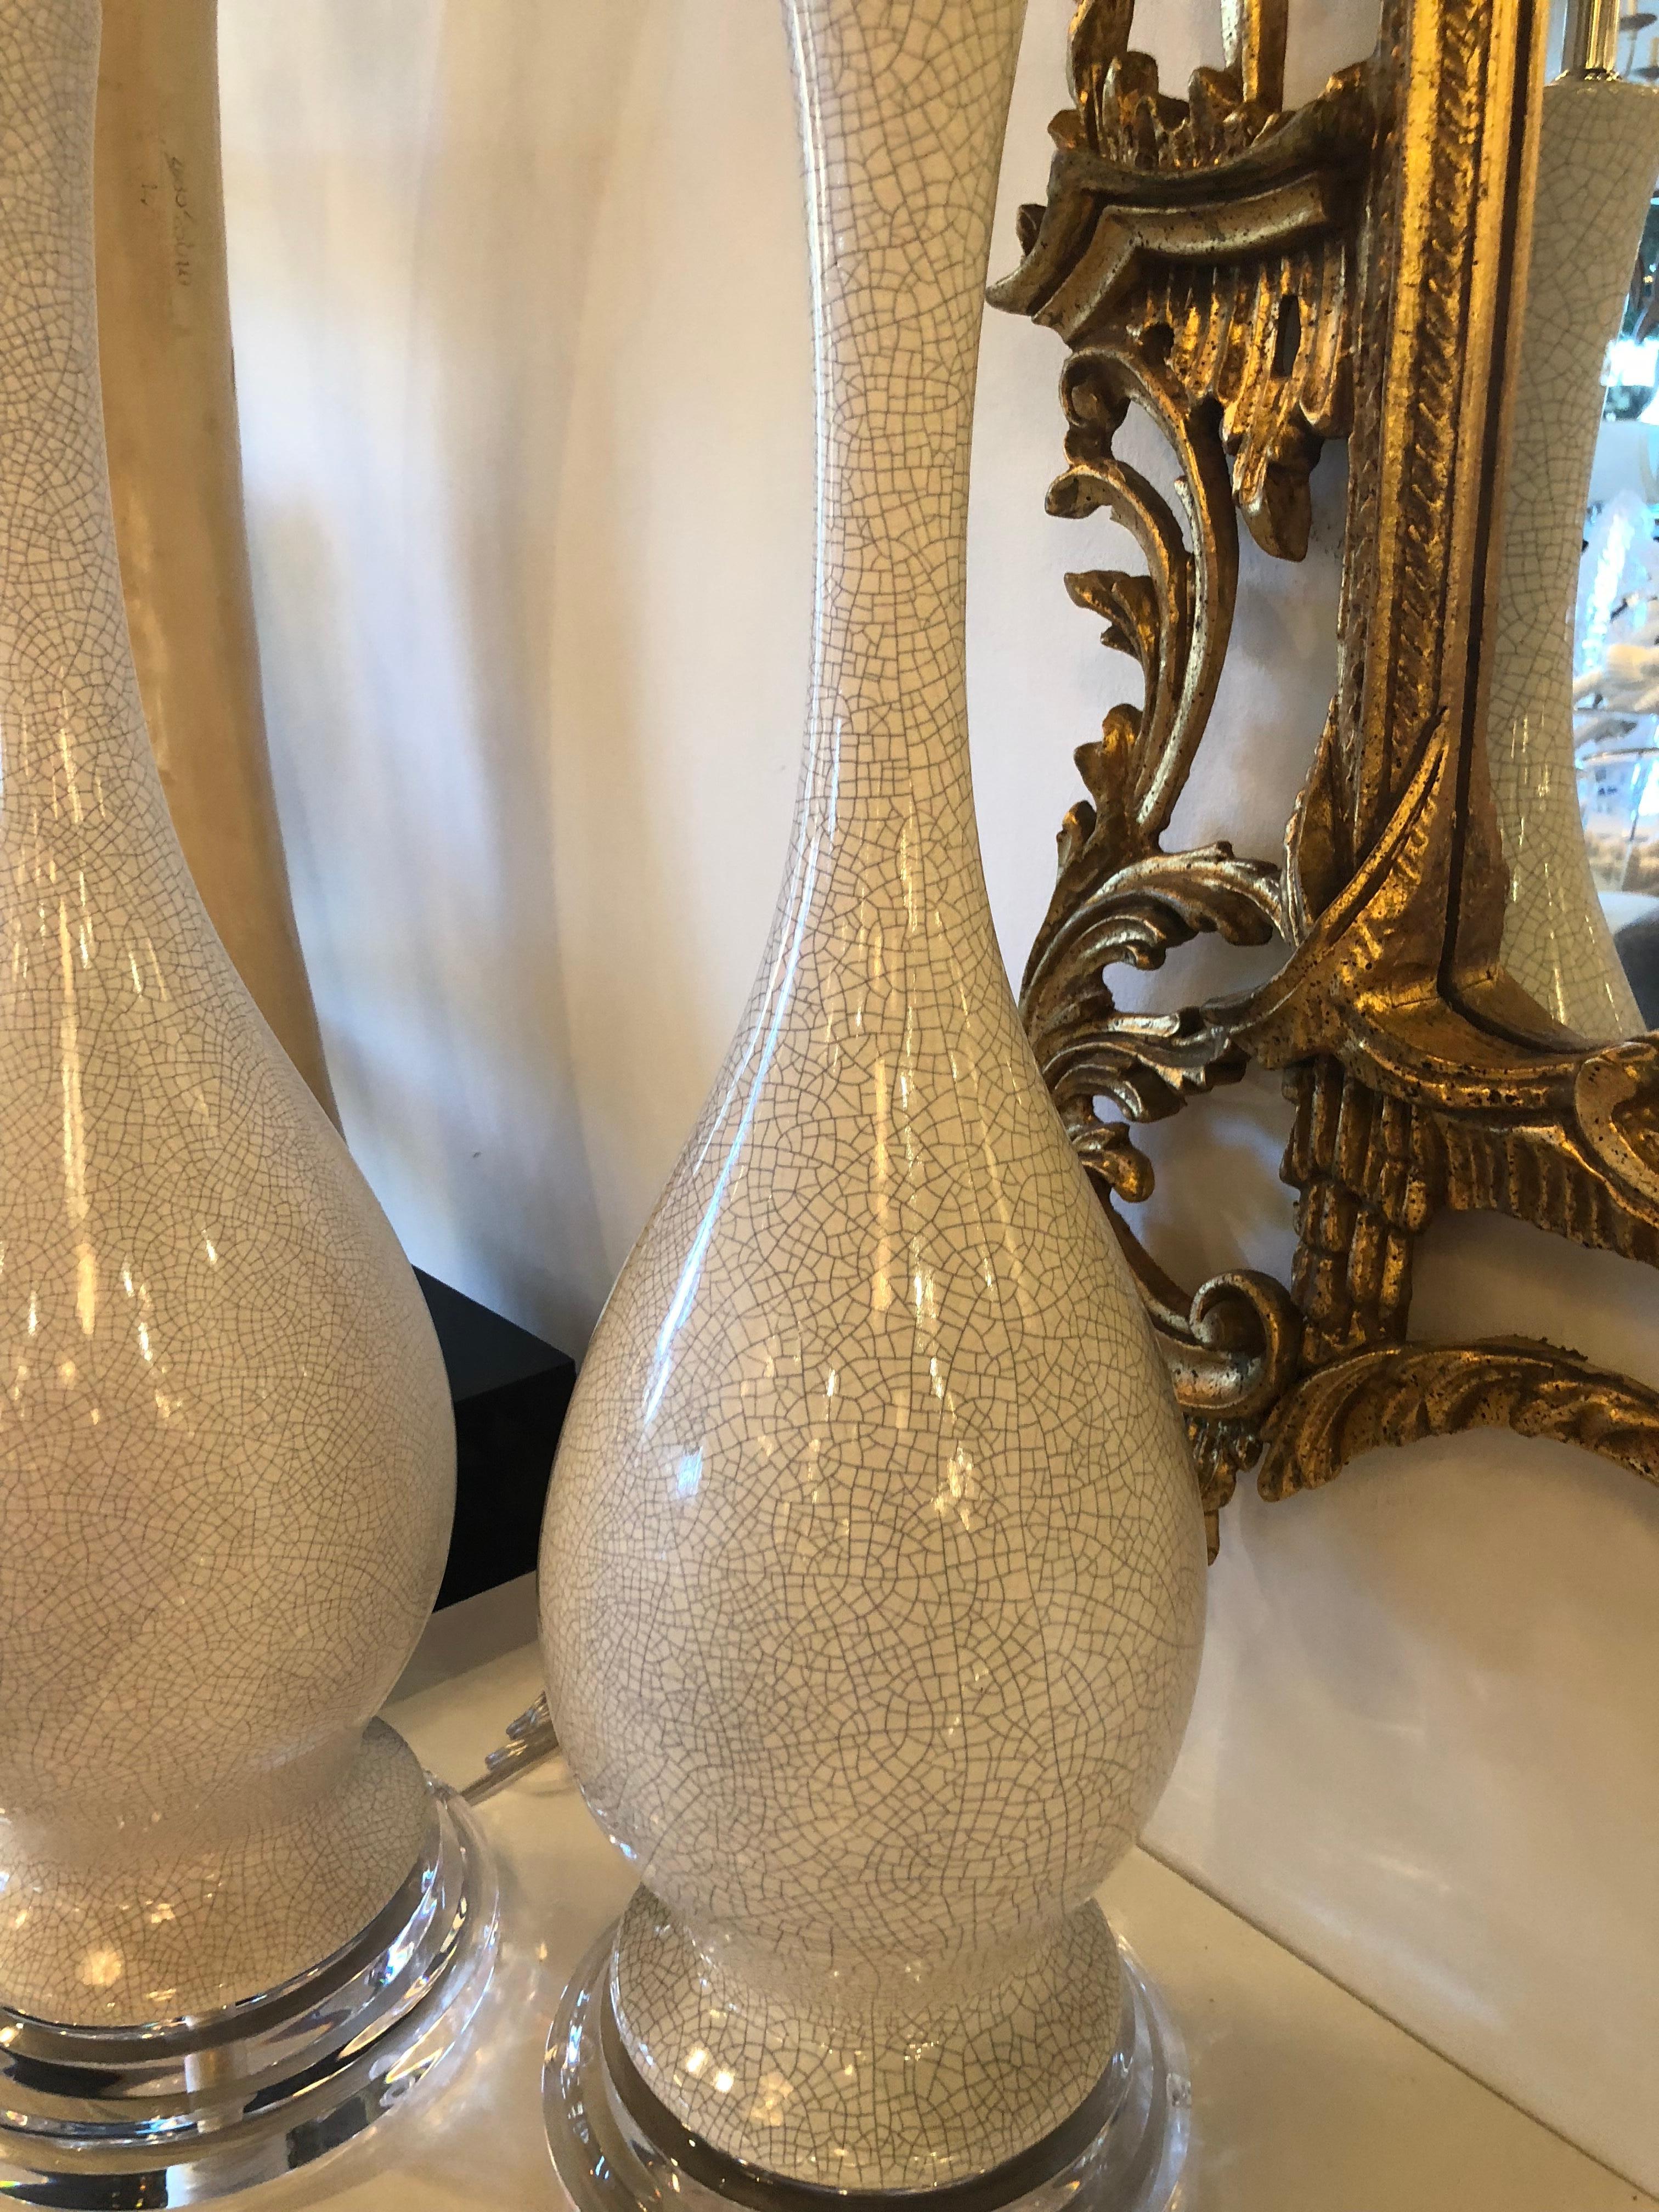 Vintage pair of crackle glaze porcelain table lamps. Grey crackle on white lamps. Newly wired, new chrome hardware, Lucite base and finial, 3 way light.
Measures: 37” tall to top of finial.